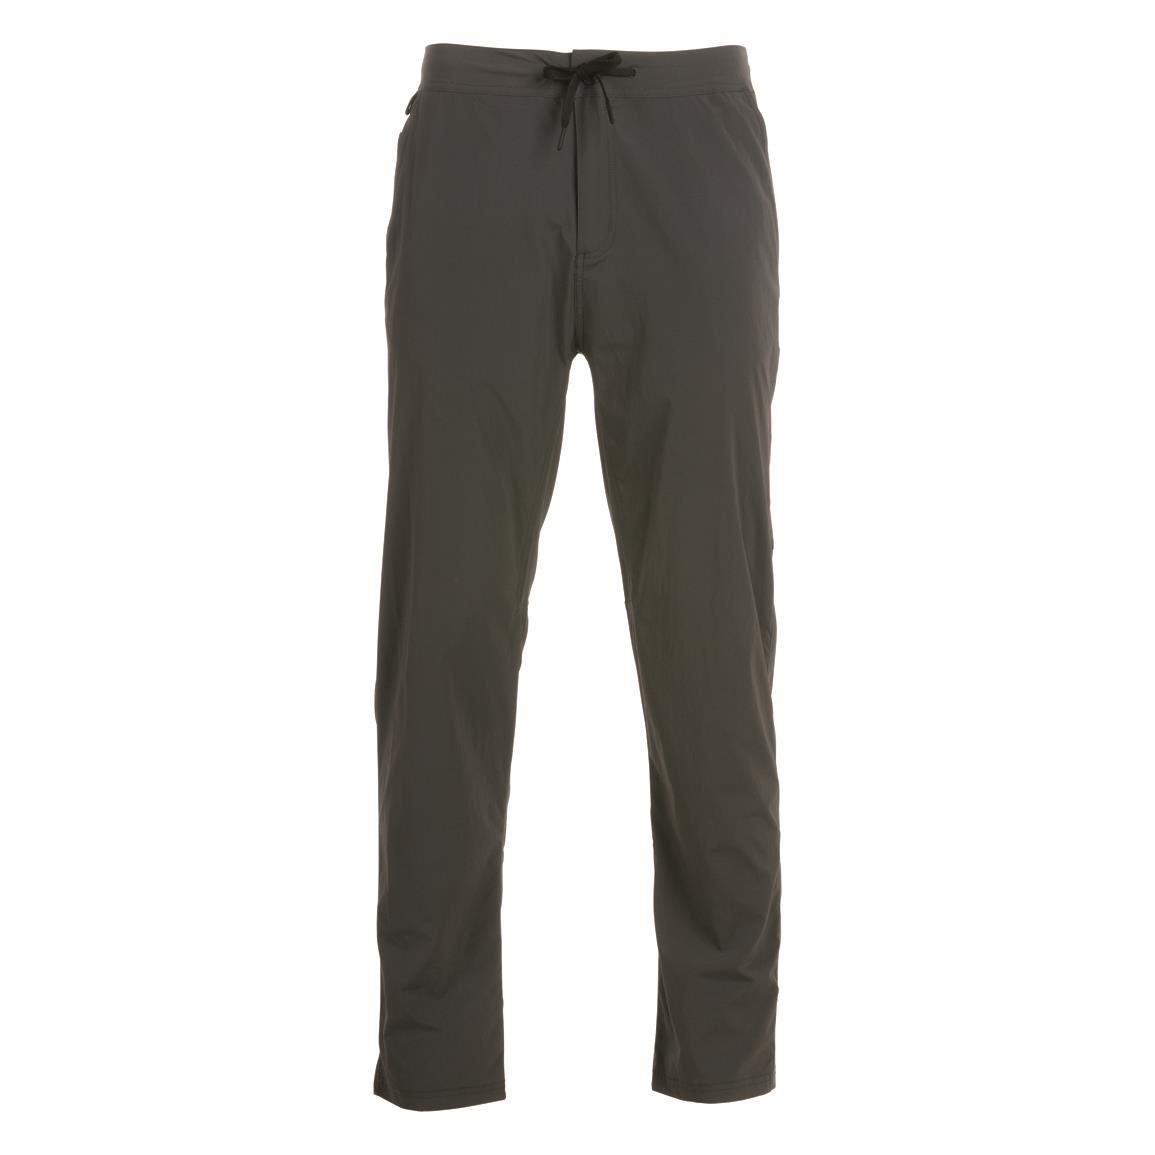 Grundens Sidereal Pant, Anchor